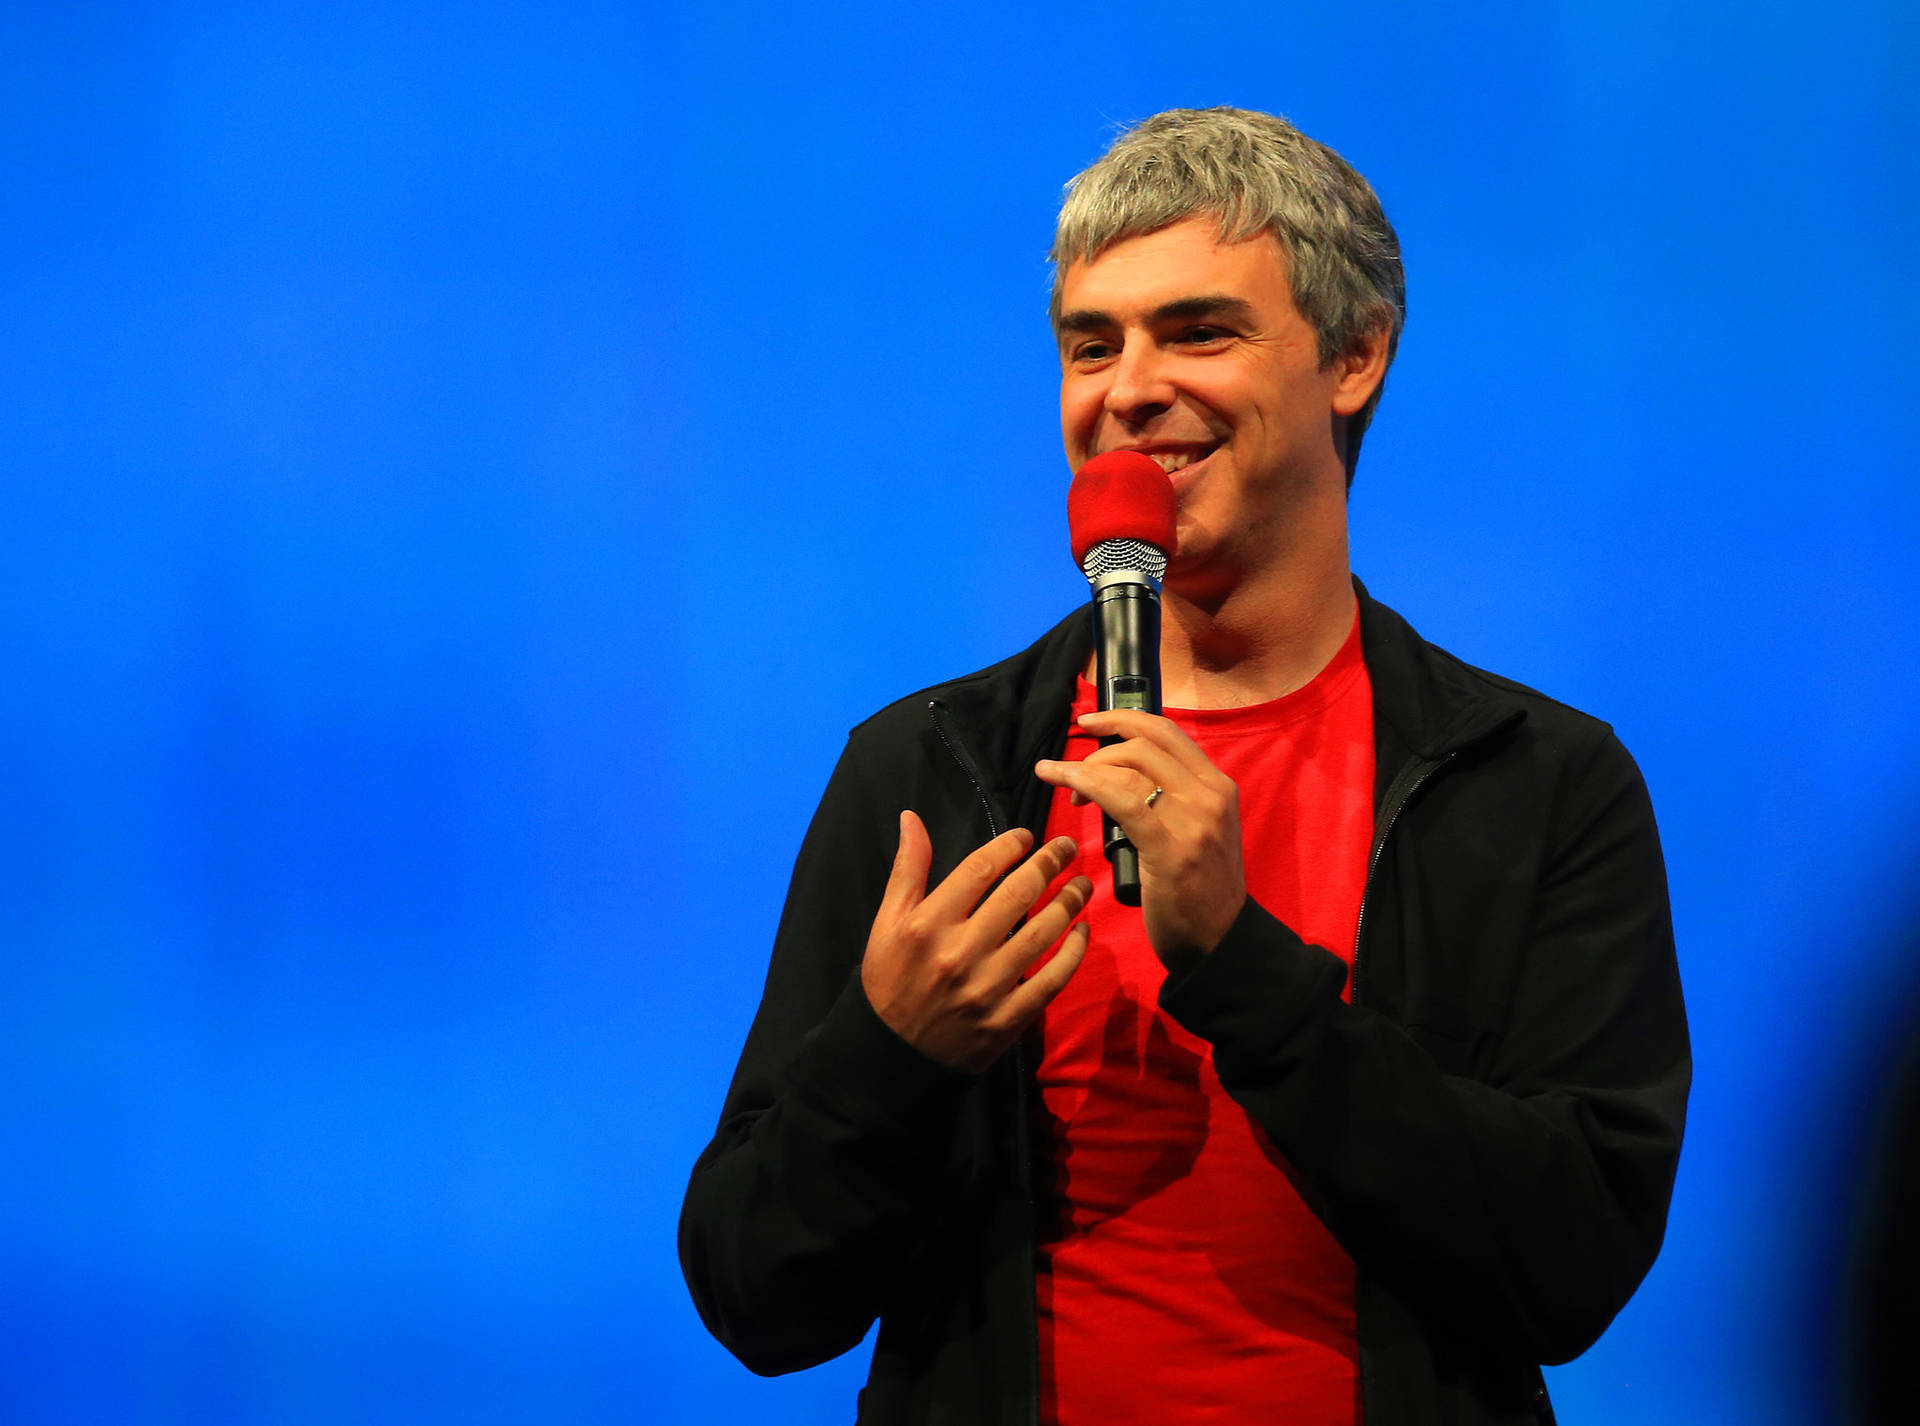 Larry Page Conference Talk Smiling Photo Wallpaper